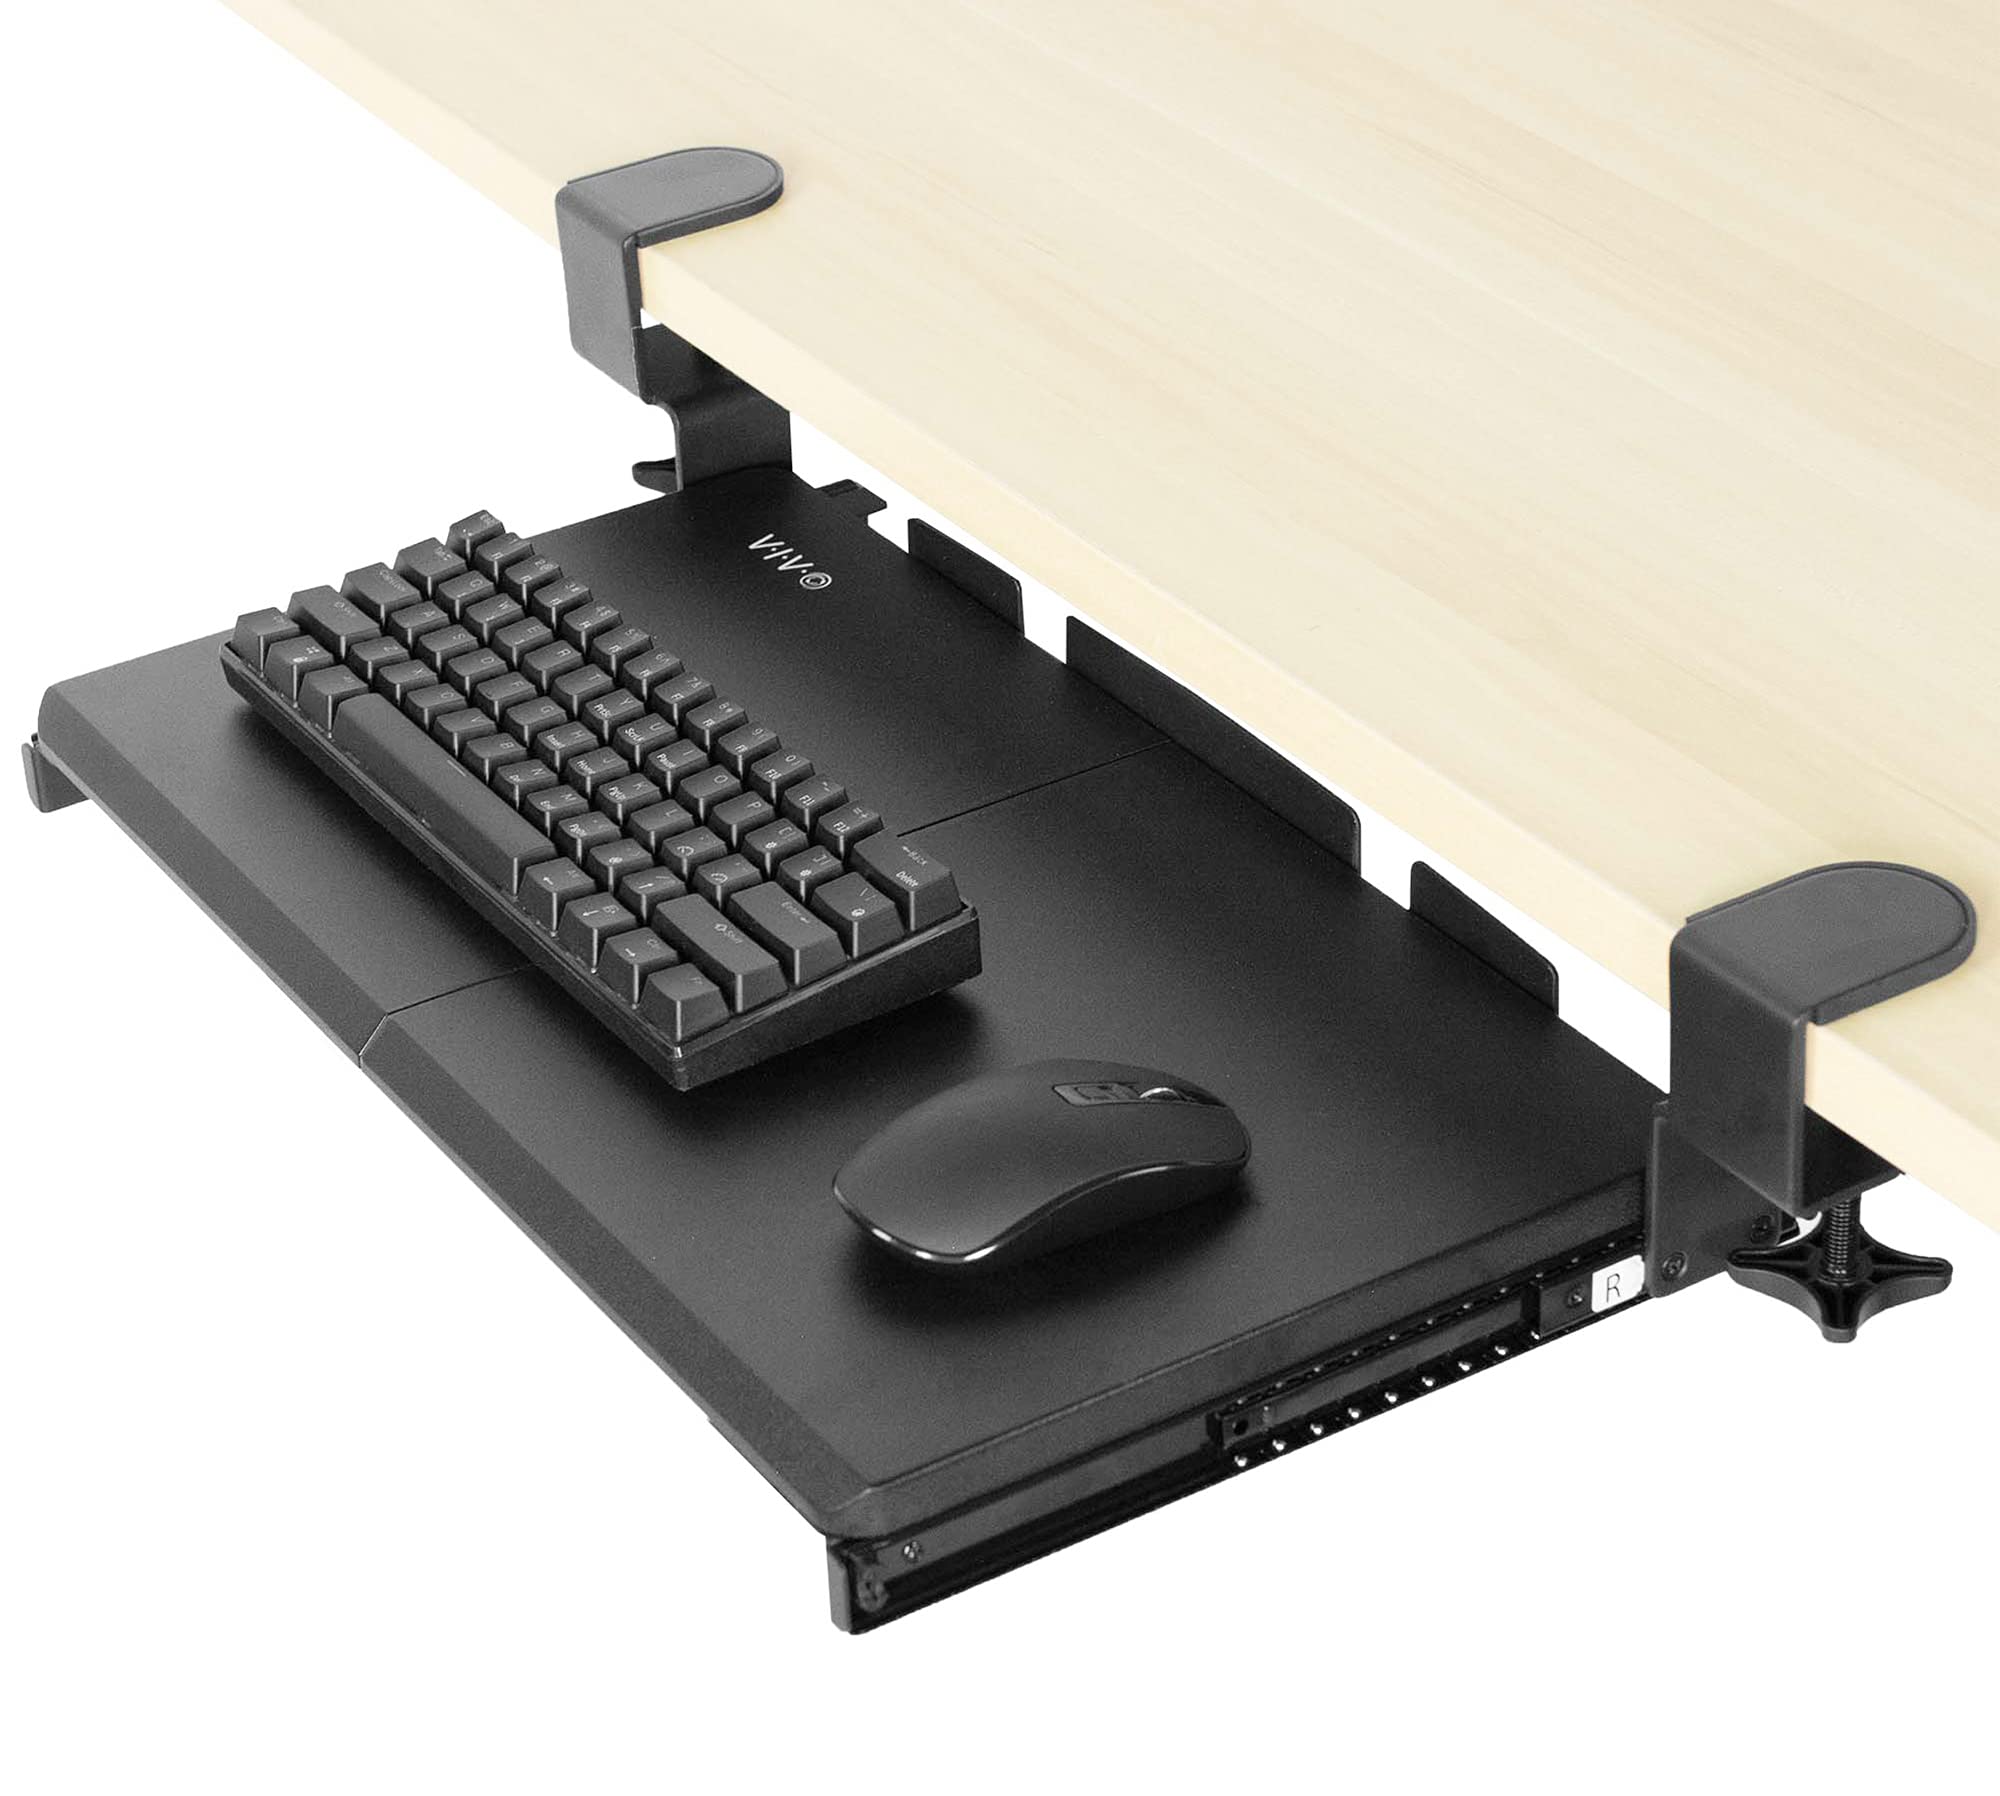 VIVO Keyboard Tray Under Desk Pull Out with Extra Sturdy C Clamp Mount System